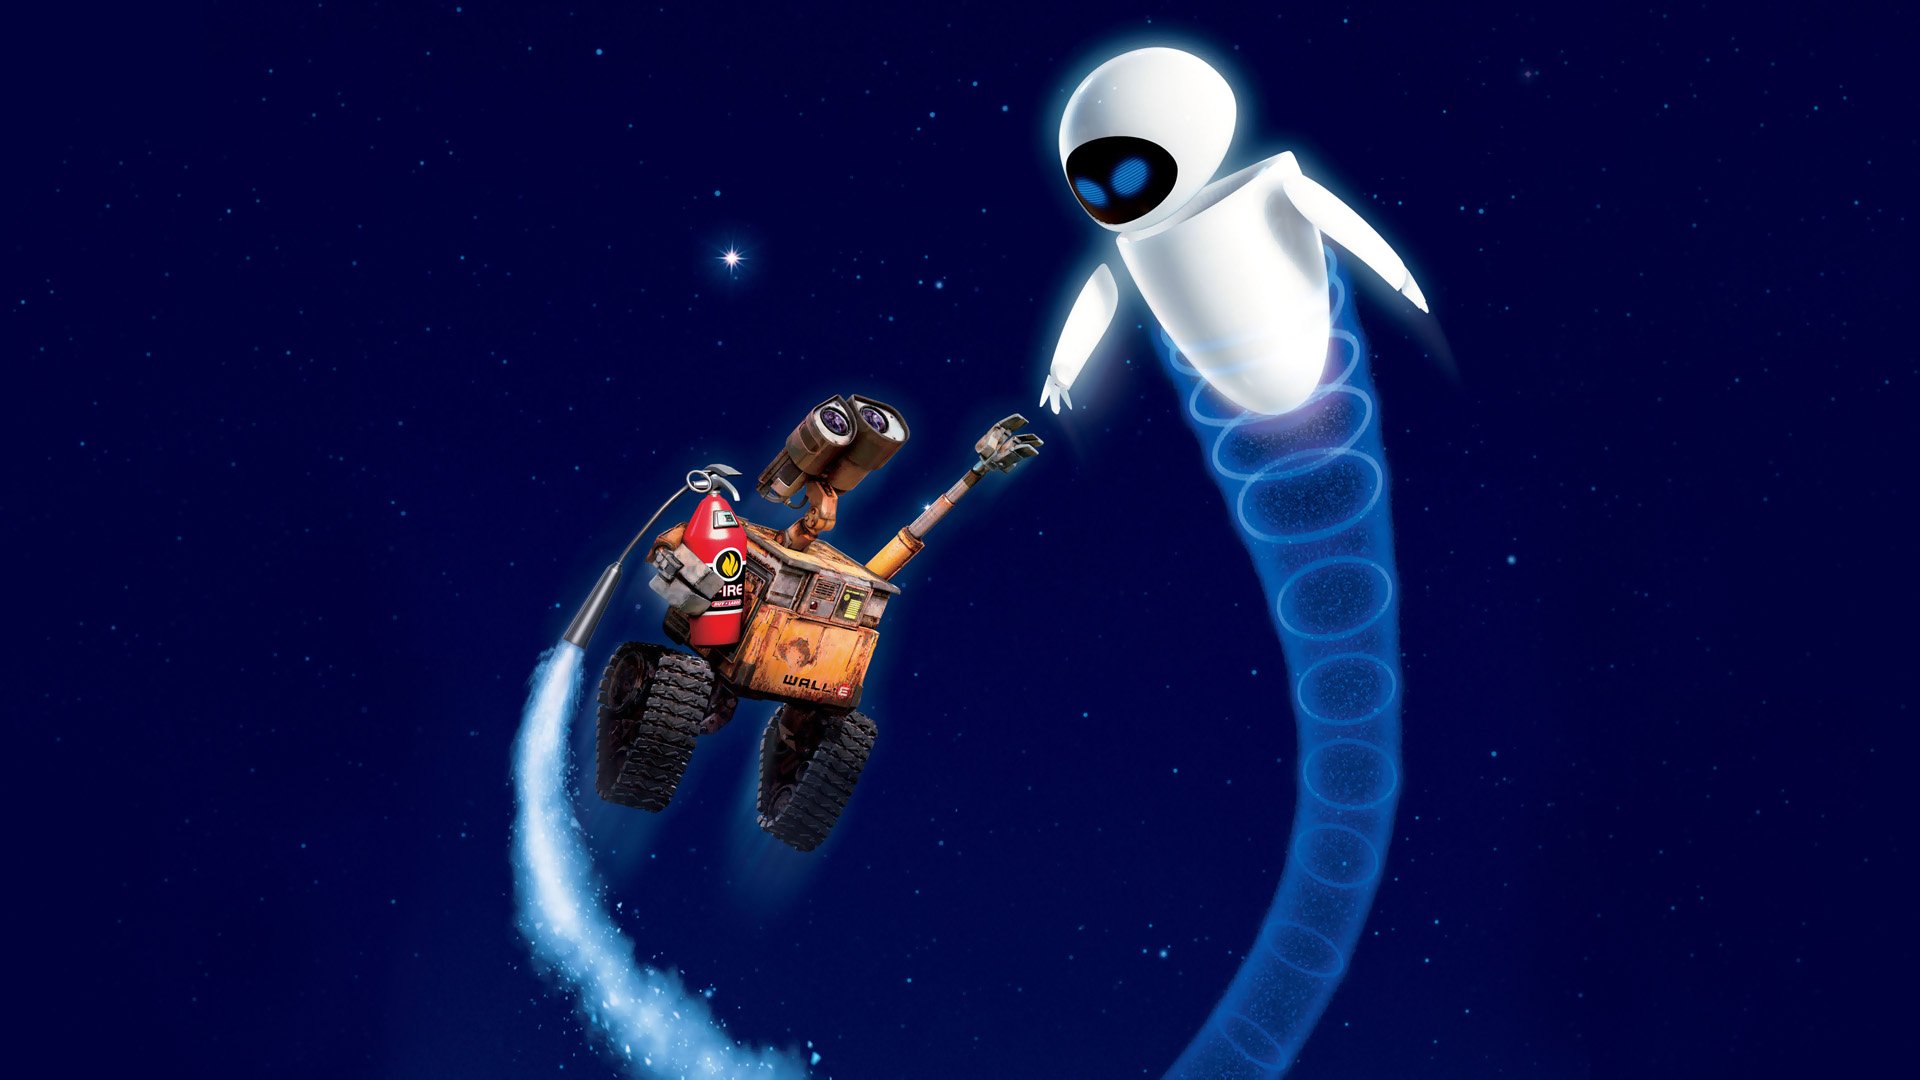 69 WallE HD Wallpapers Backgrounds Wallpaper Abyss